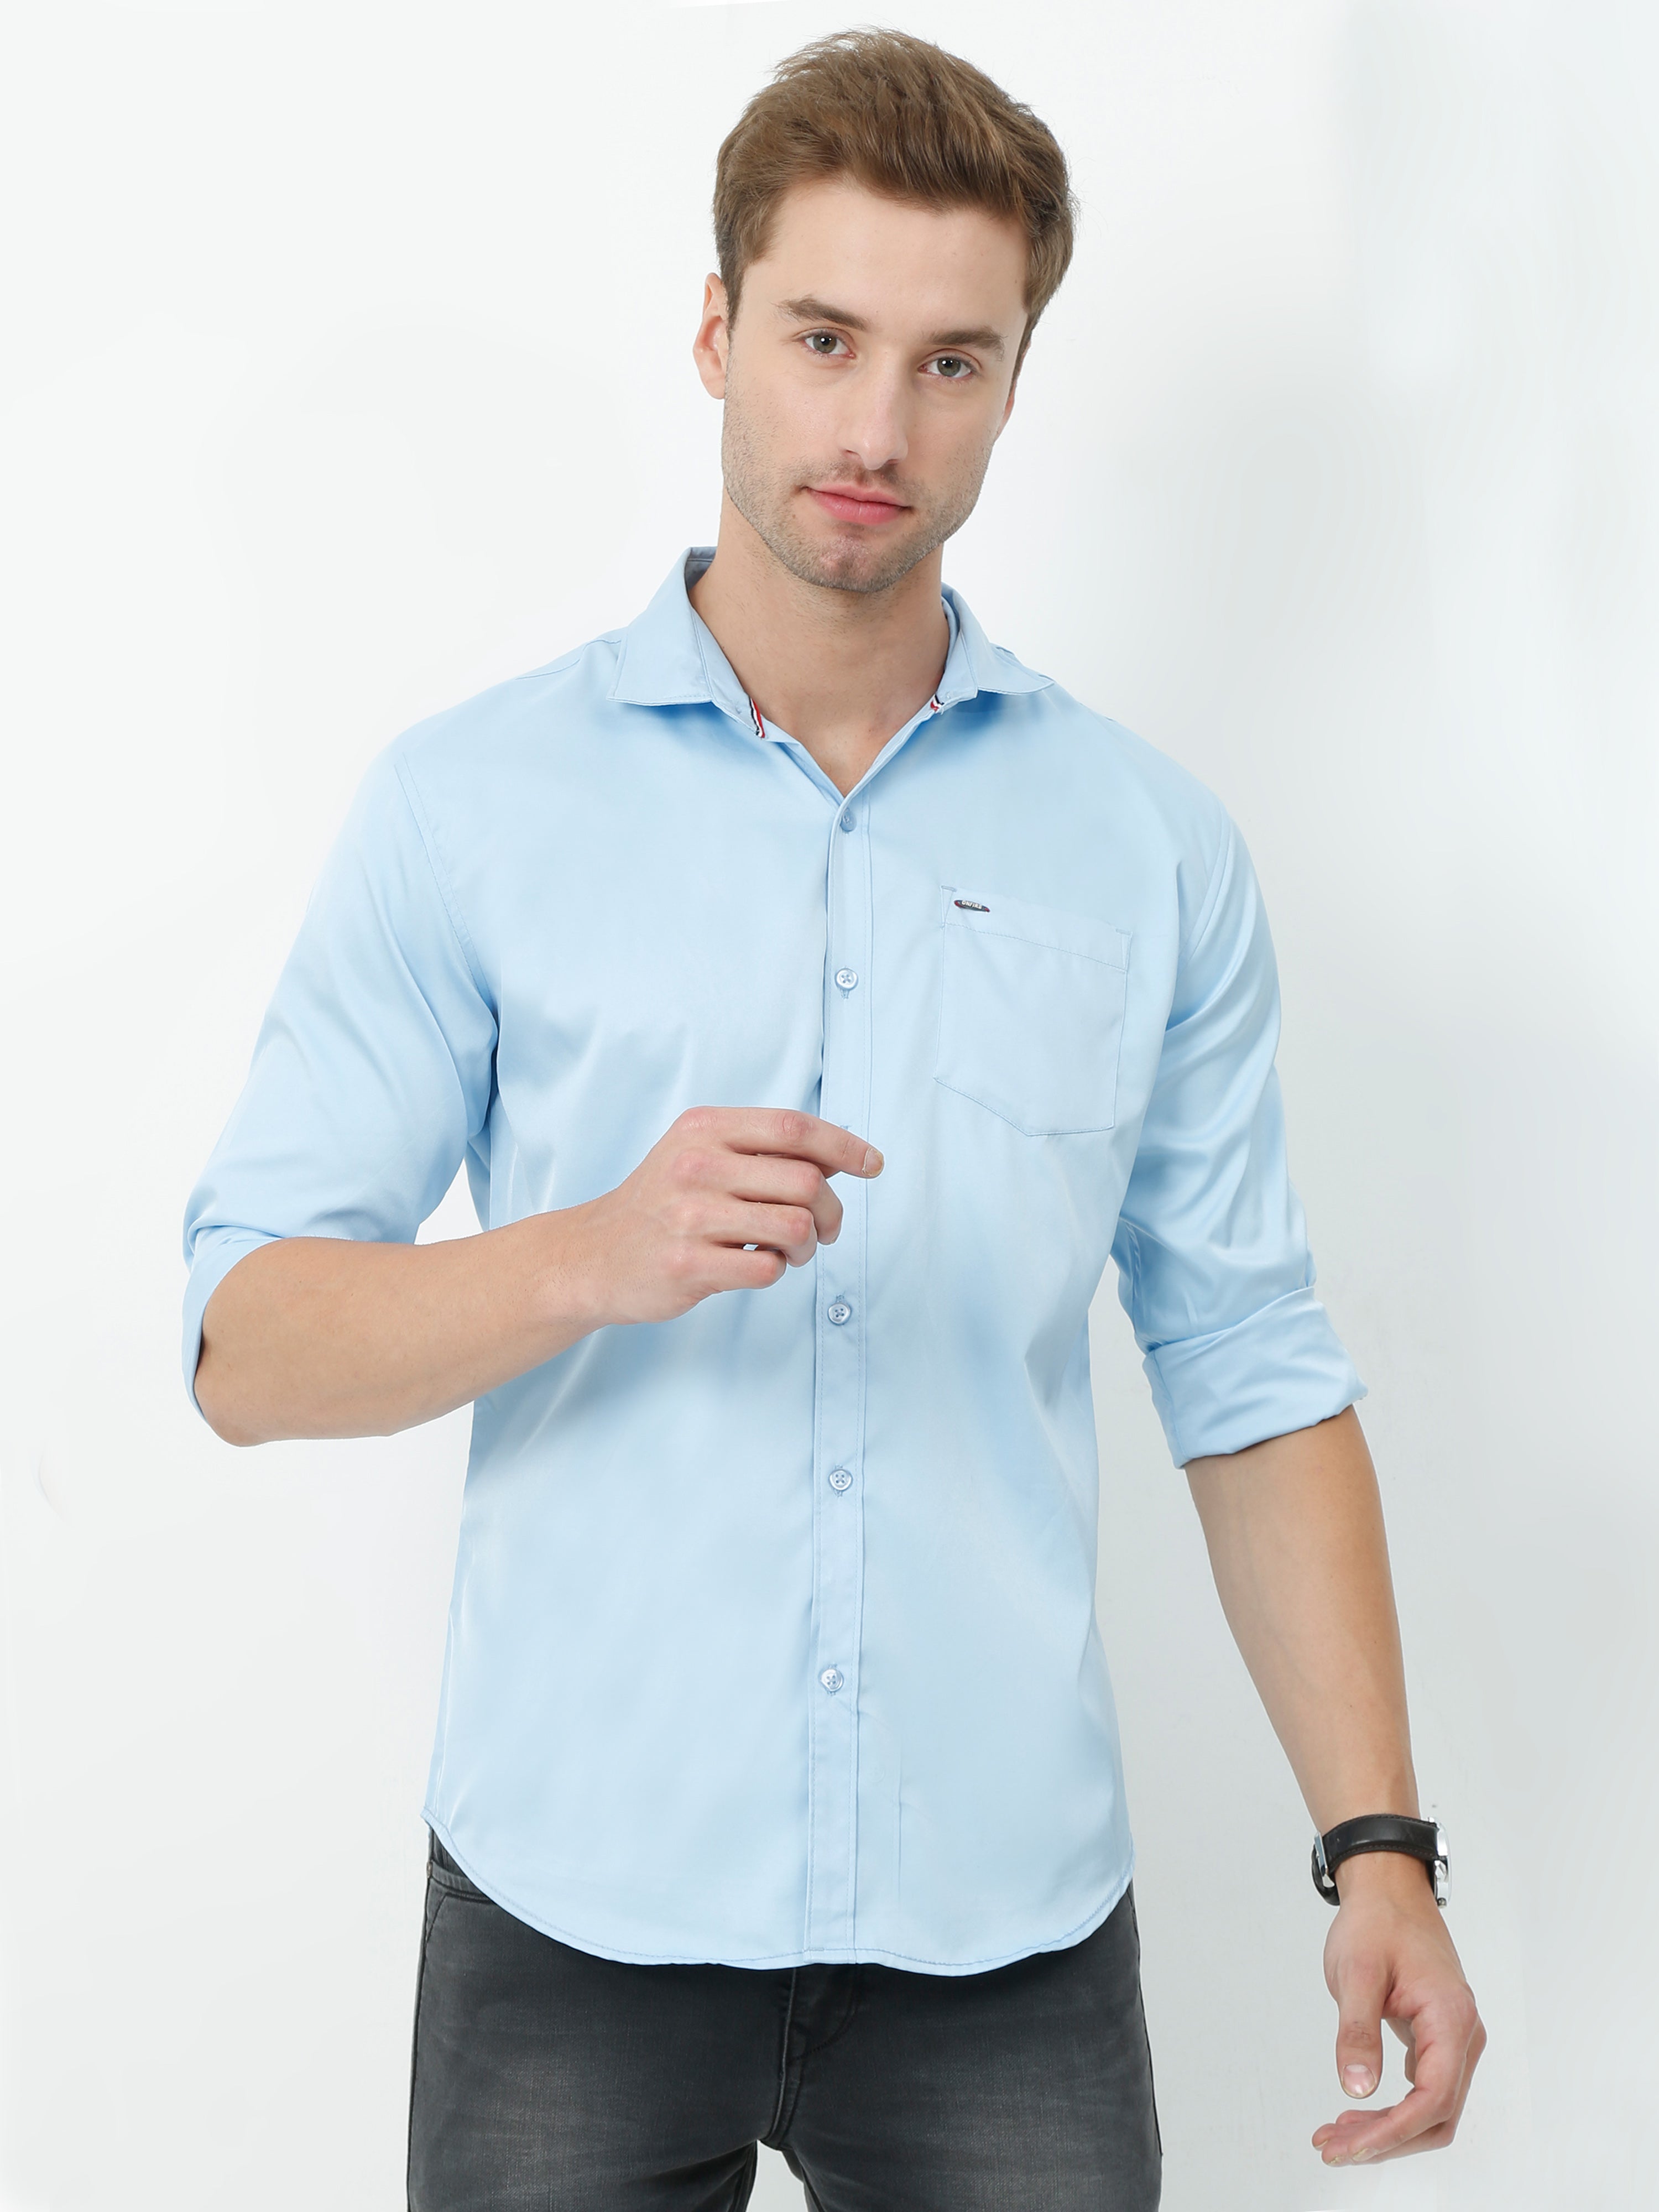 Summer Western Inspired Mens Casual Denim Jeans Shirt For Men With  Imitation Jeans Loose Fit Top For A Flattering Look From Kaoya, $17.77 |  DHgate.Com